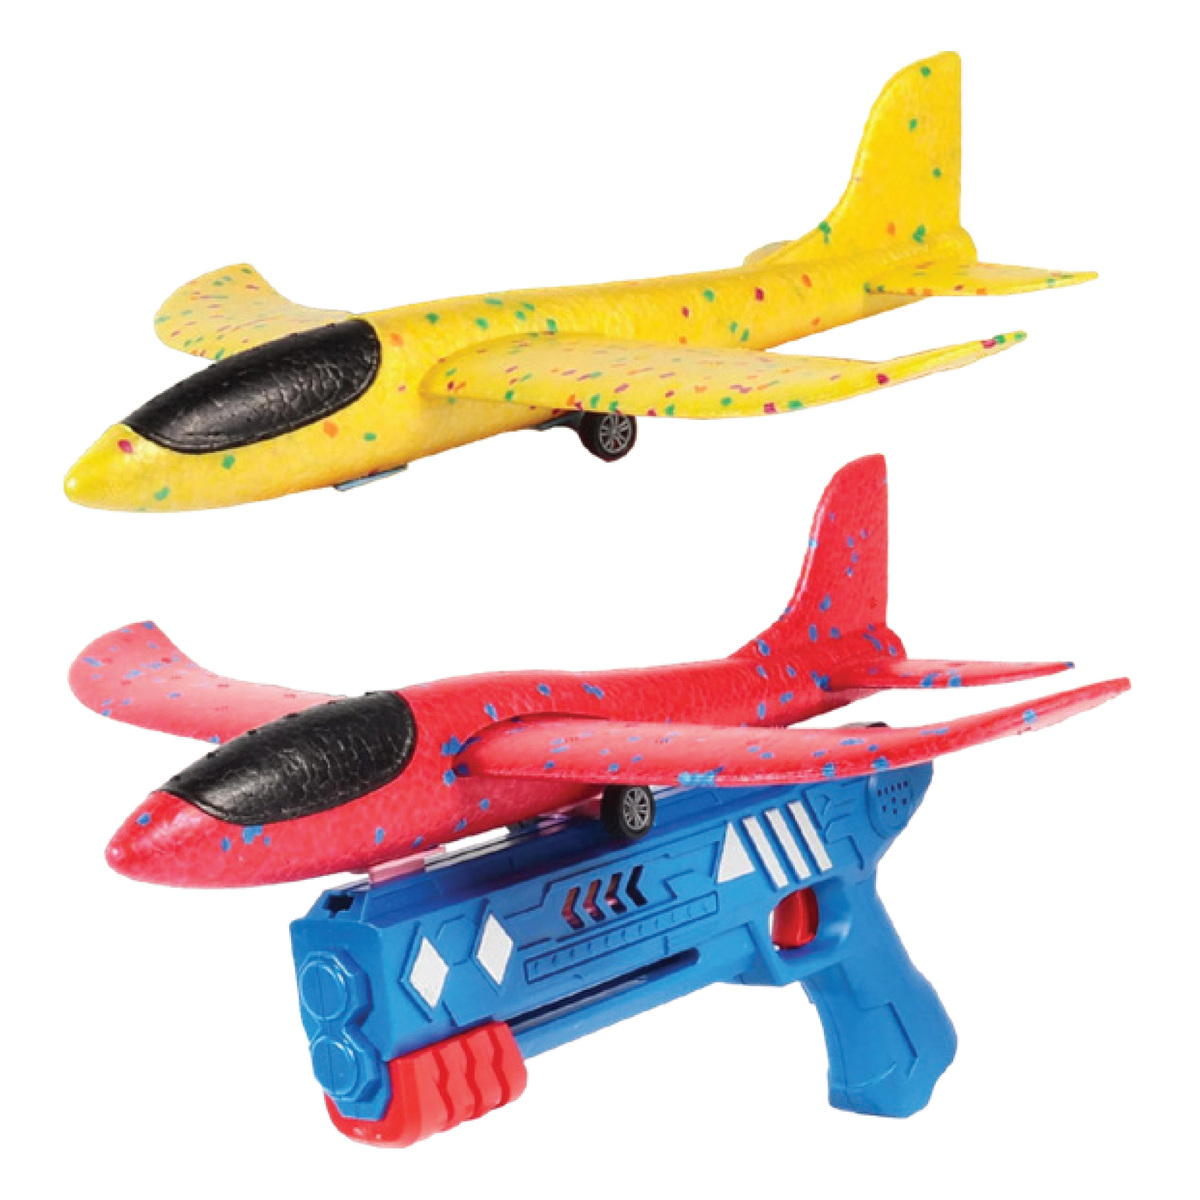 Toy Land Air Plane Toy Gun Play Set XZ035 Assorted Colors